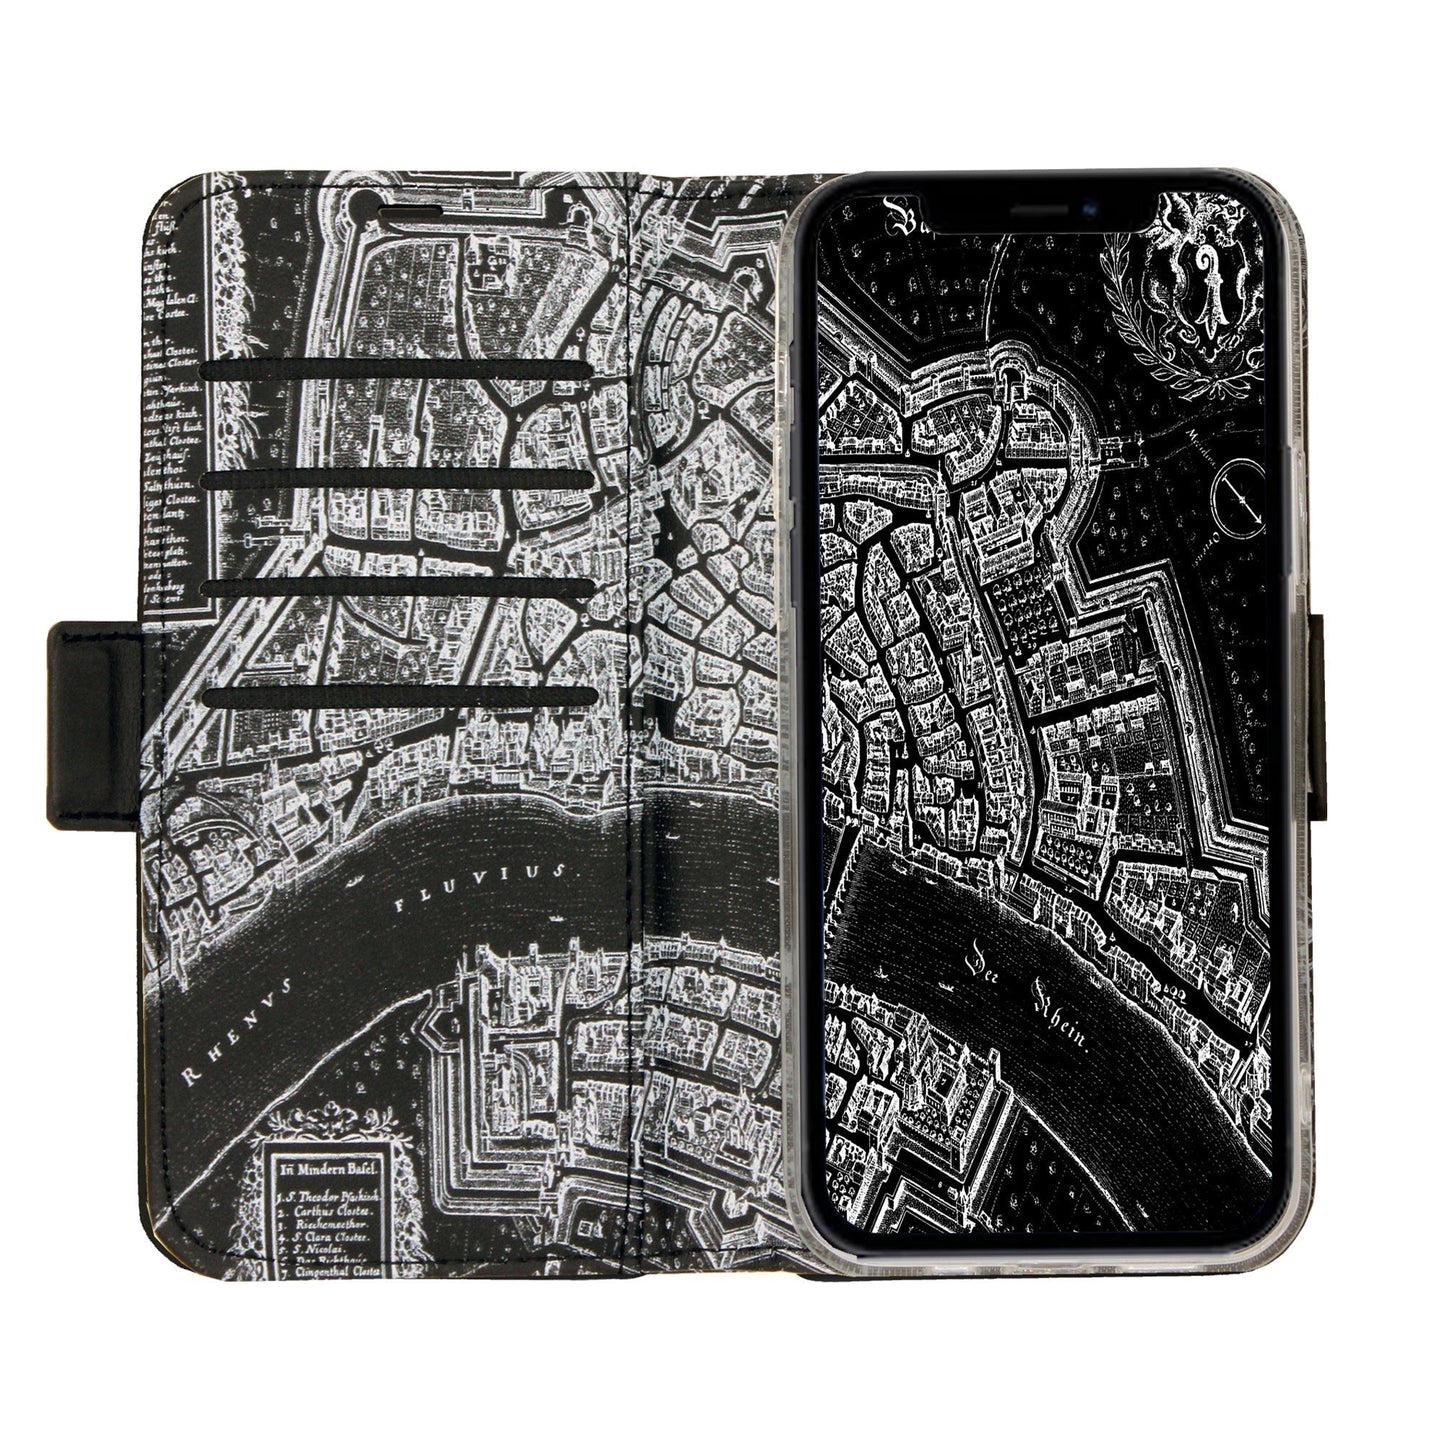 Basel Merian Negative Victor Case for iPhone 13 Pro